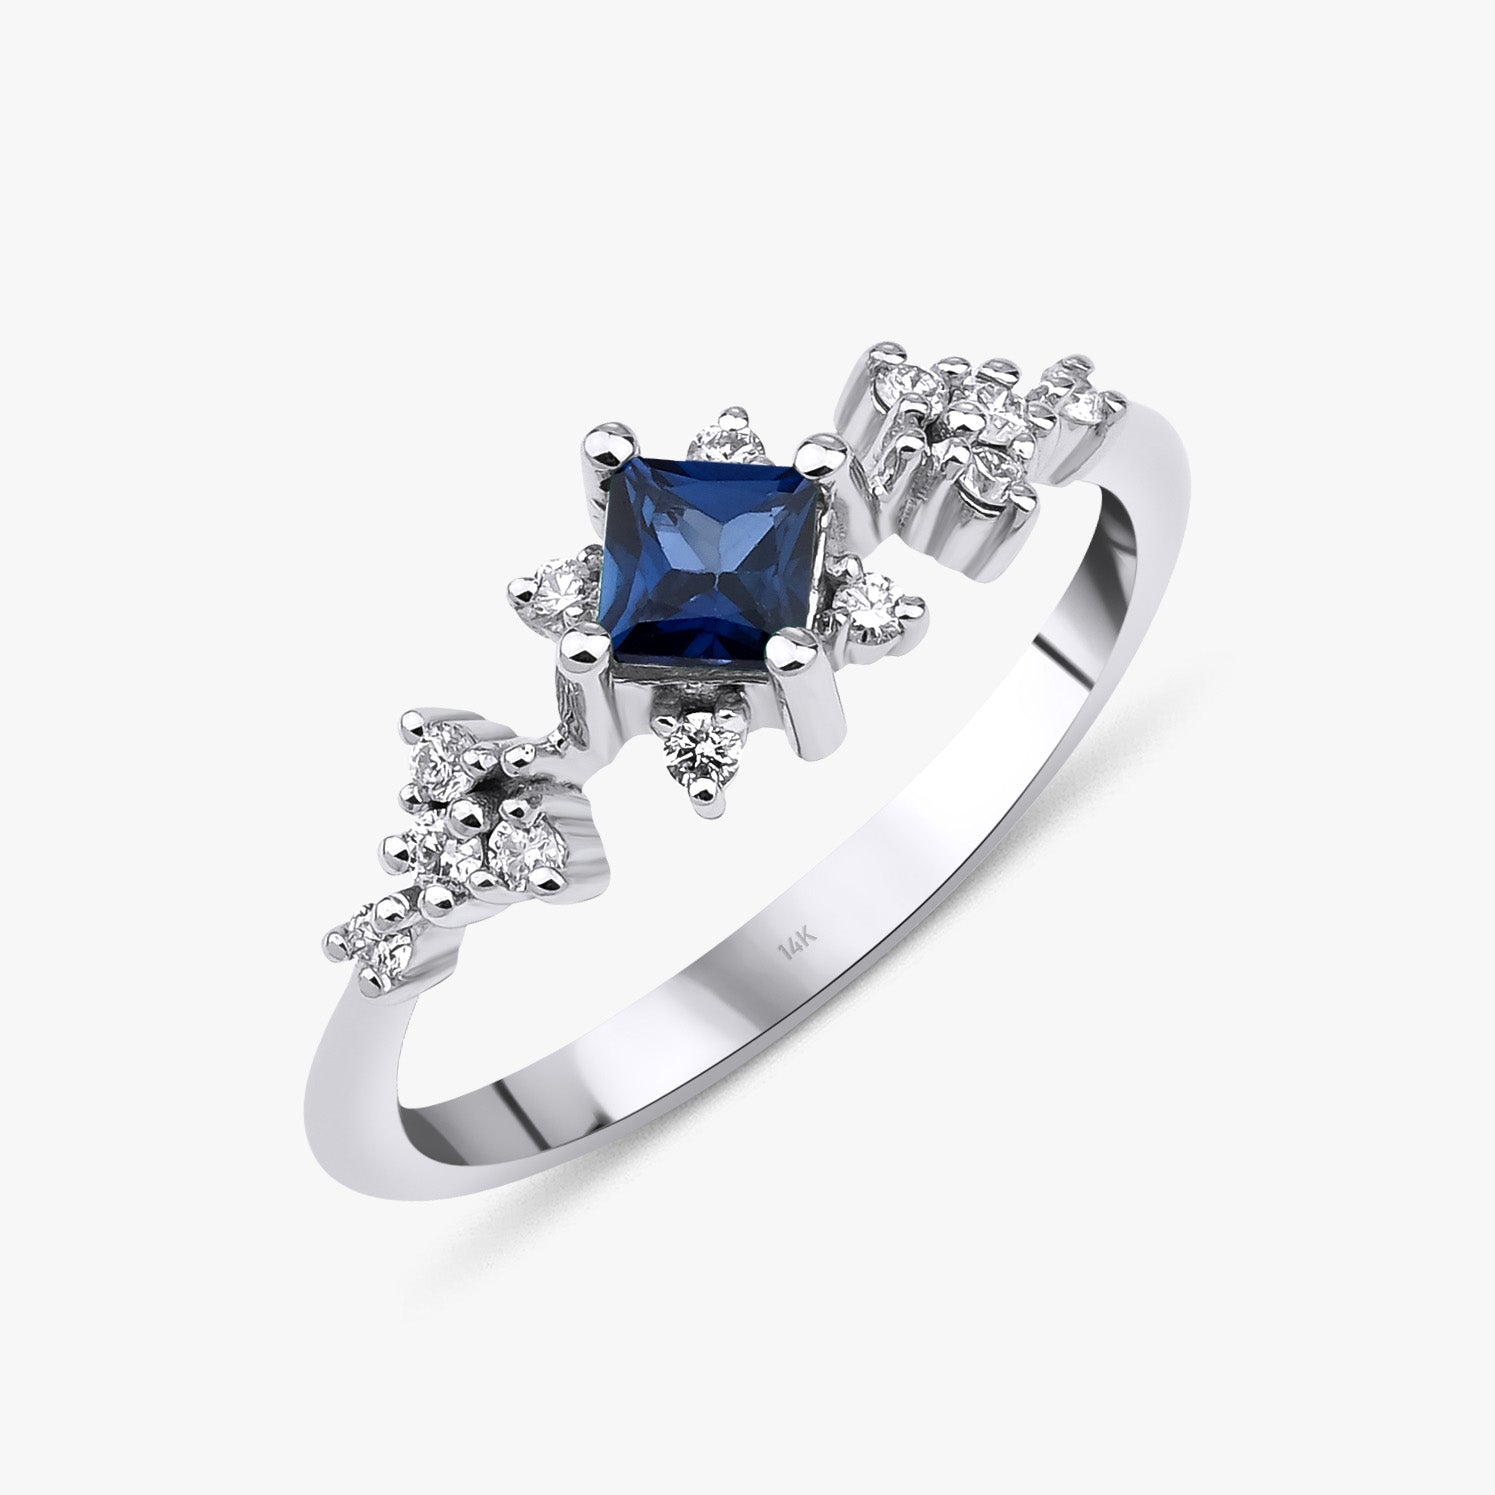 Princess Cut Sapphire and Diamond Ring in 14K Gold